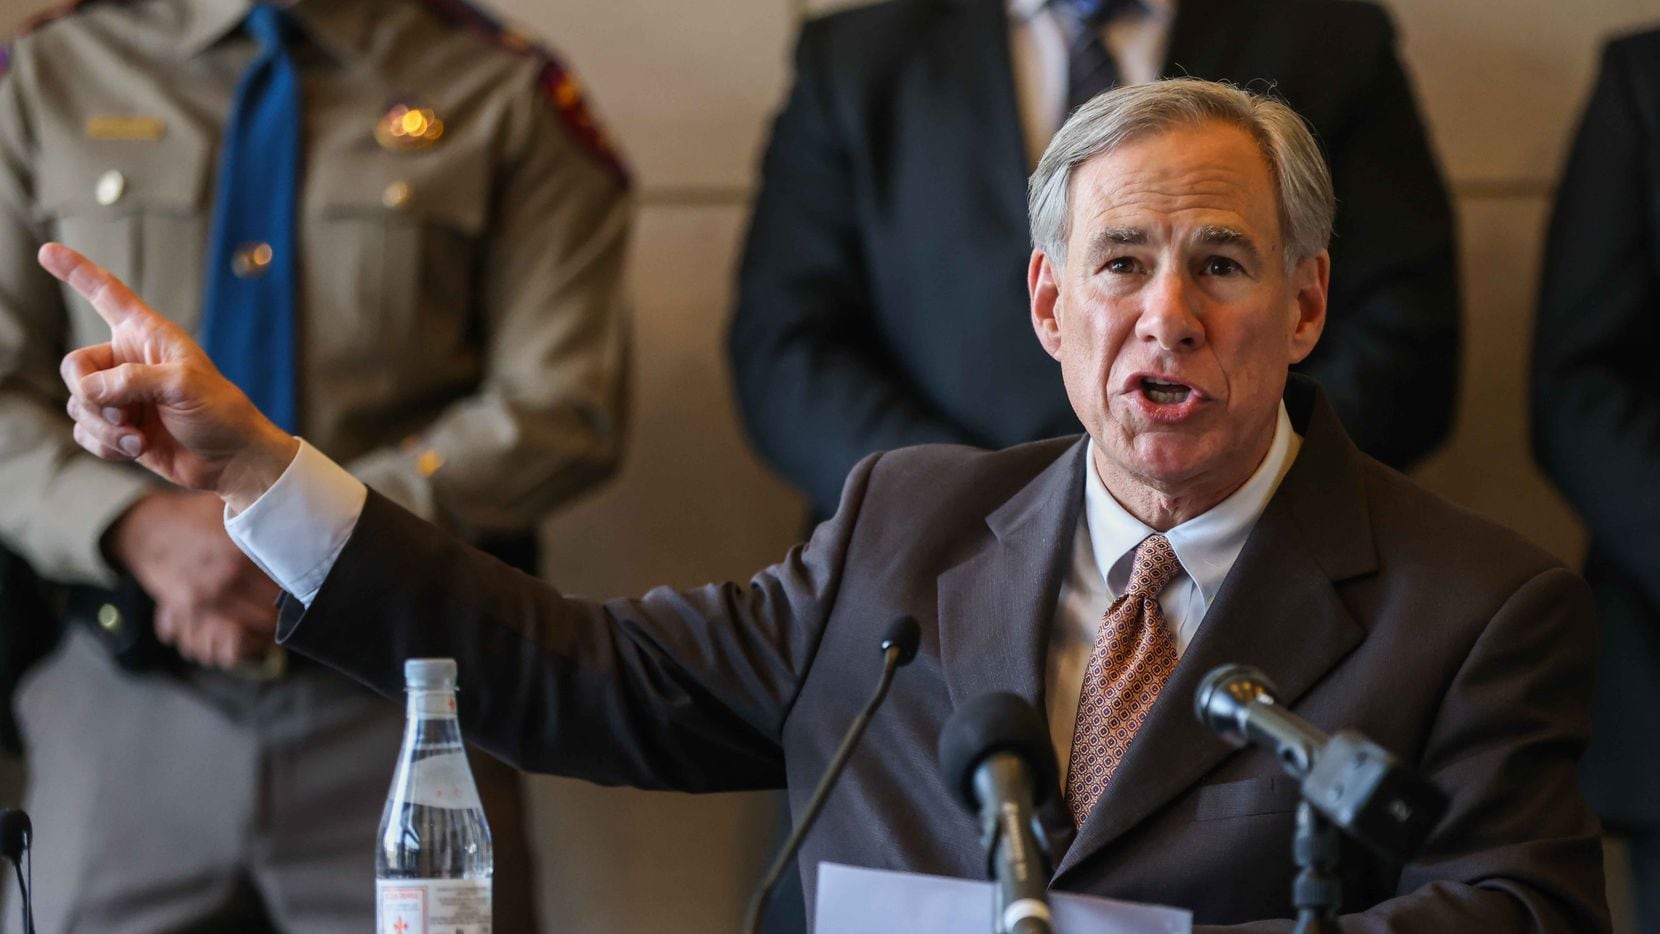 More must be done to abolish critical race theory, Gov. Greg Abbott said in a statement...